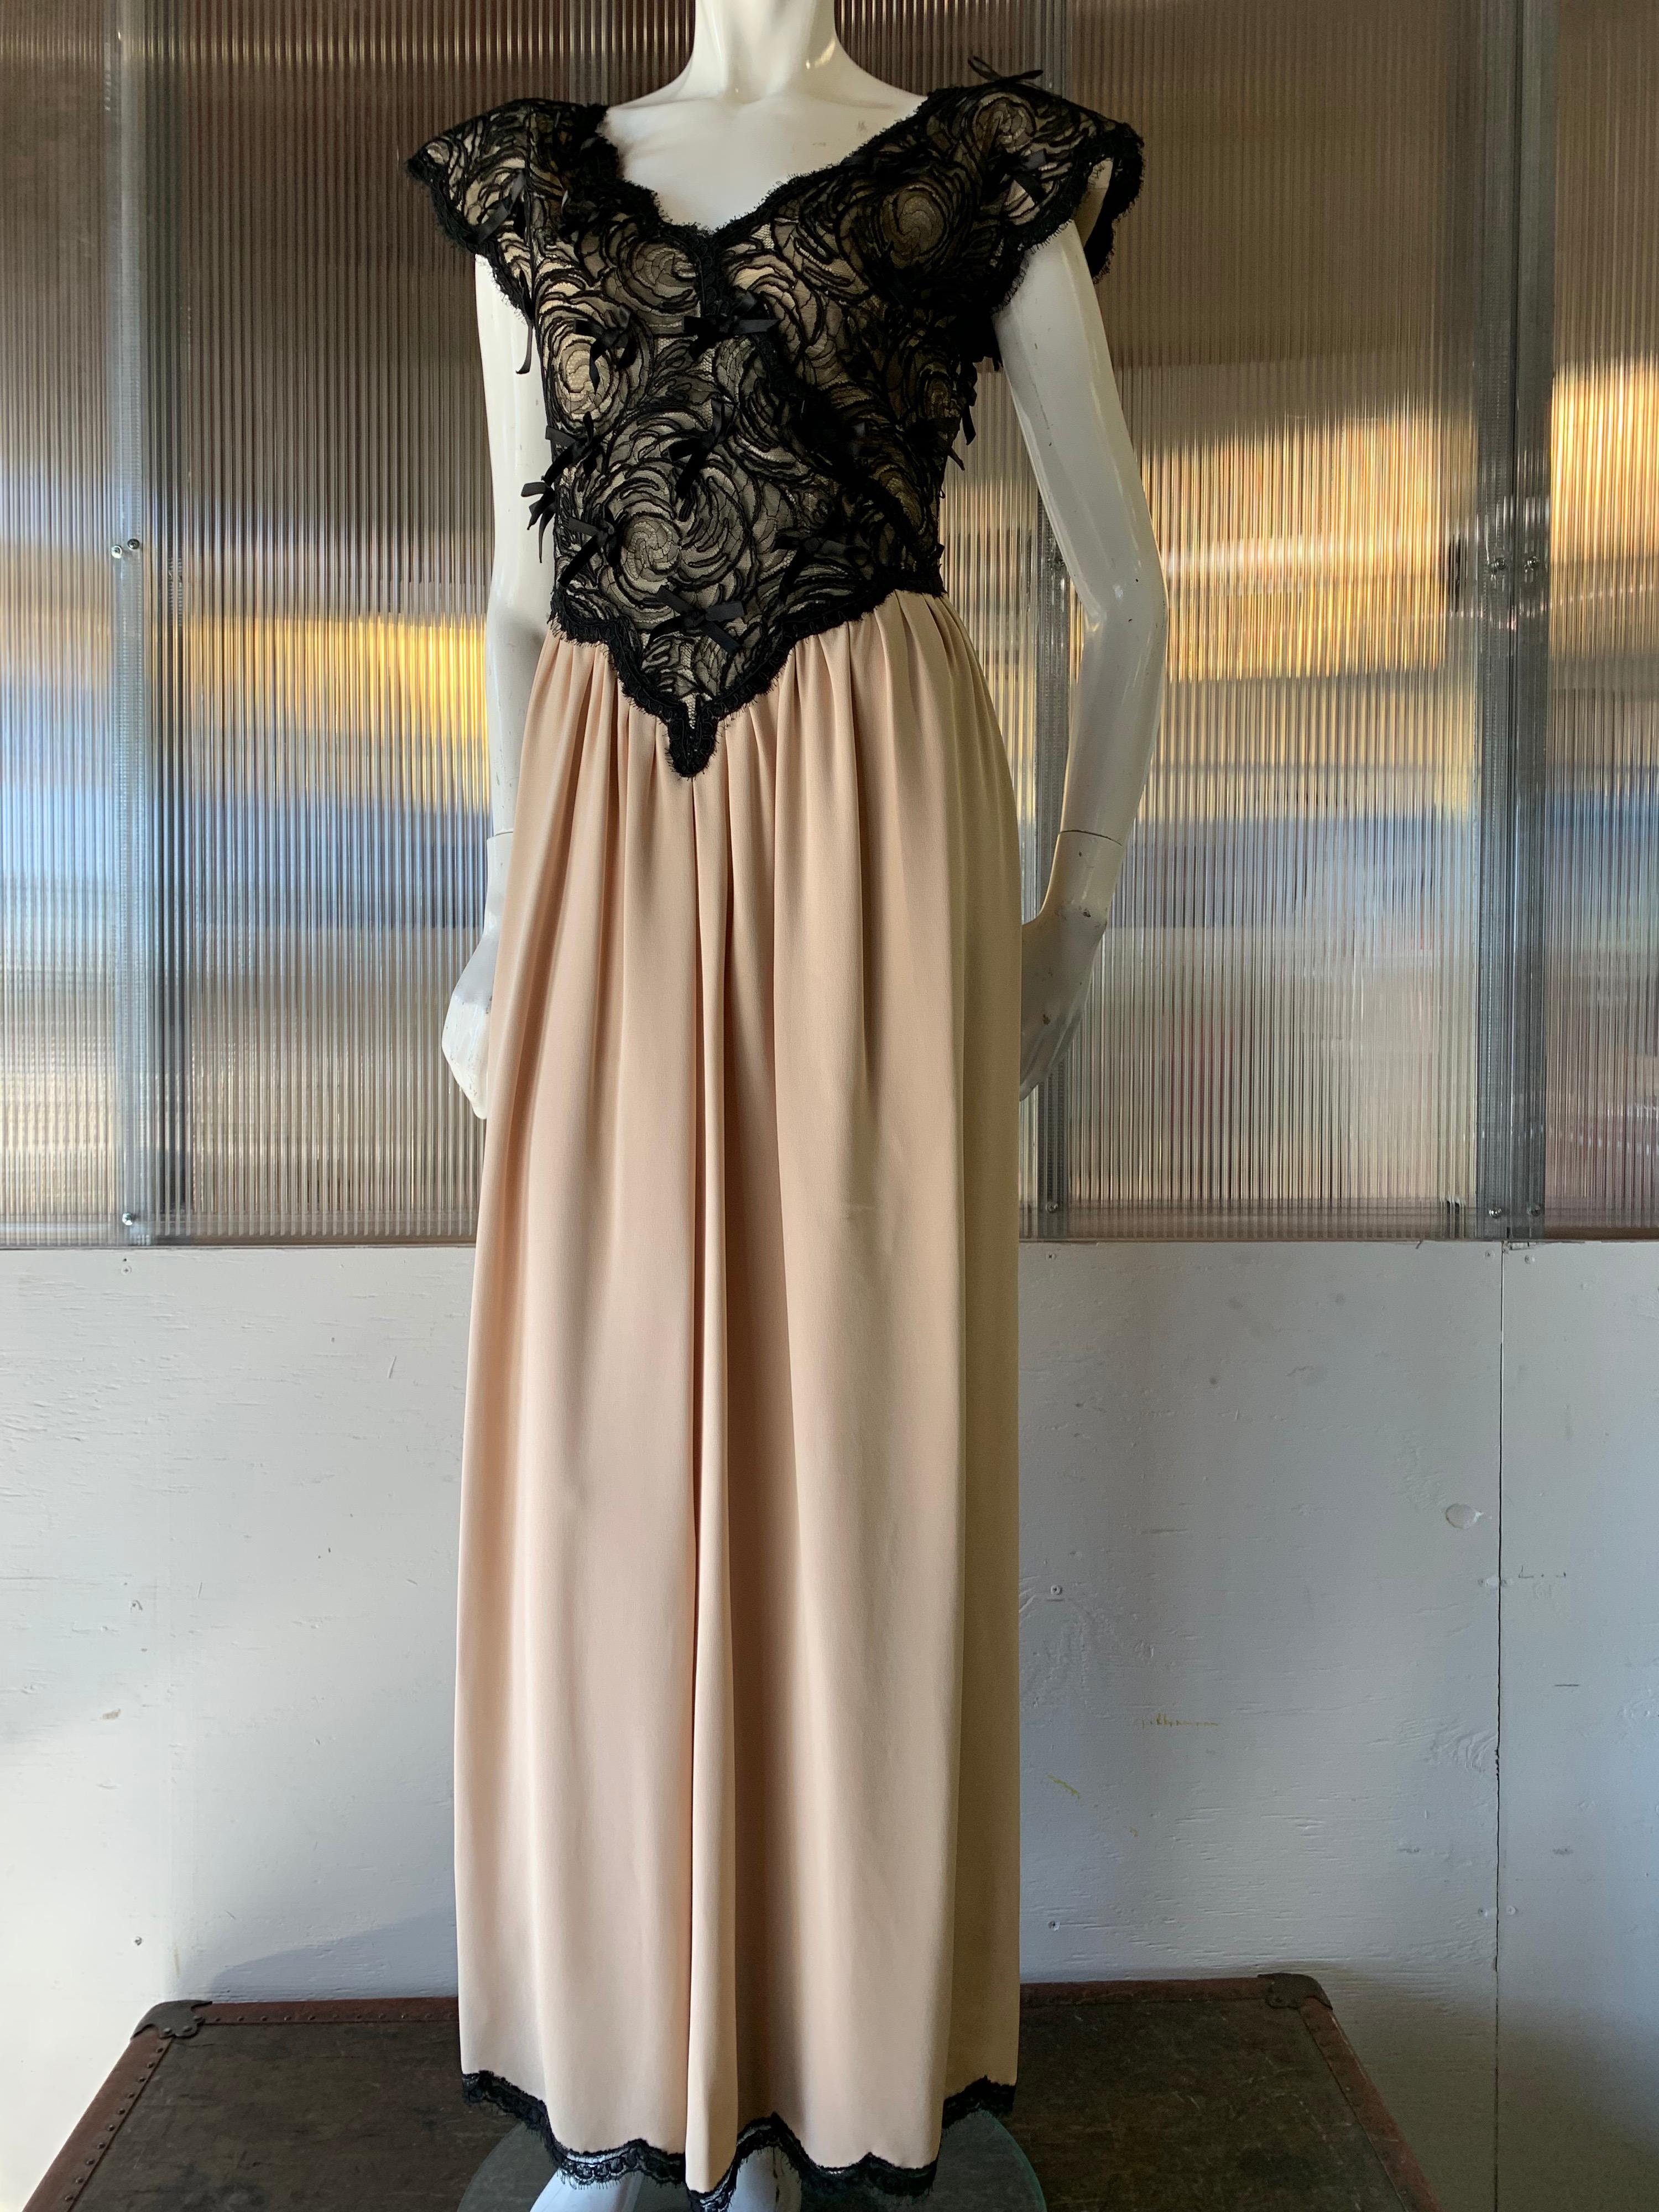 1980s Geoffrey Beene Black Lace & Cream Silk Gown W/ Exaggerated Shoulders. Lined black silk lace surplice bodice embellished with silk satin bows and stiffened butterfly wing sleeves. Deep V-shaped point at bodice hem. A double layered gathered